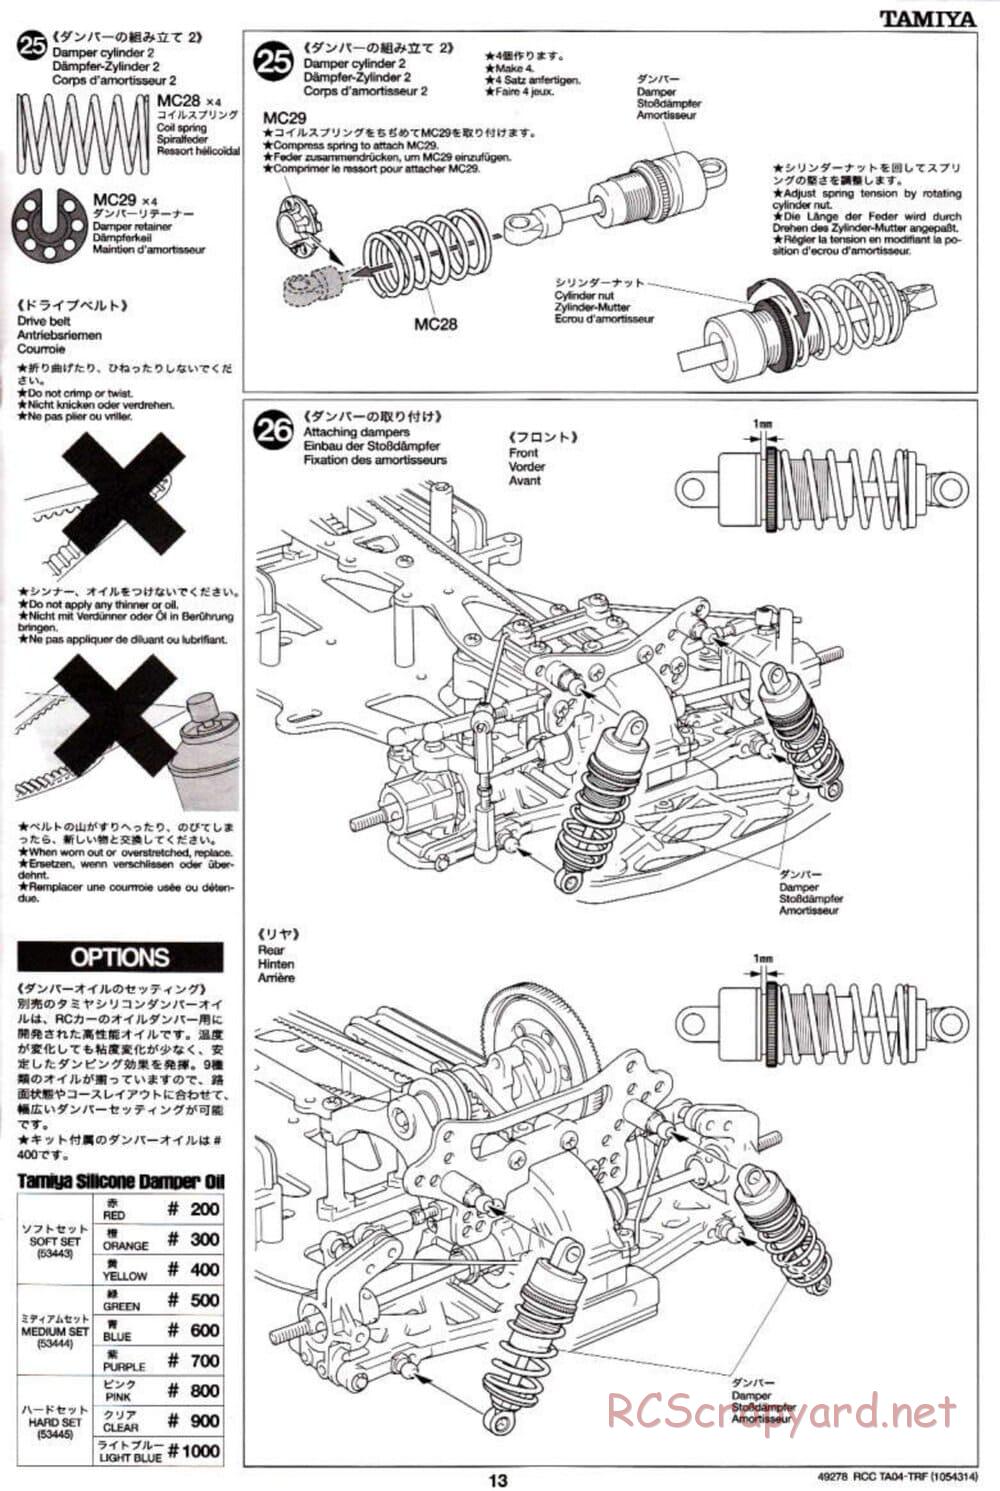 Tamiya - TA-04 TRF Special Chassis Chassis - Manual - Page 13